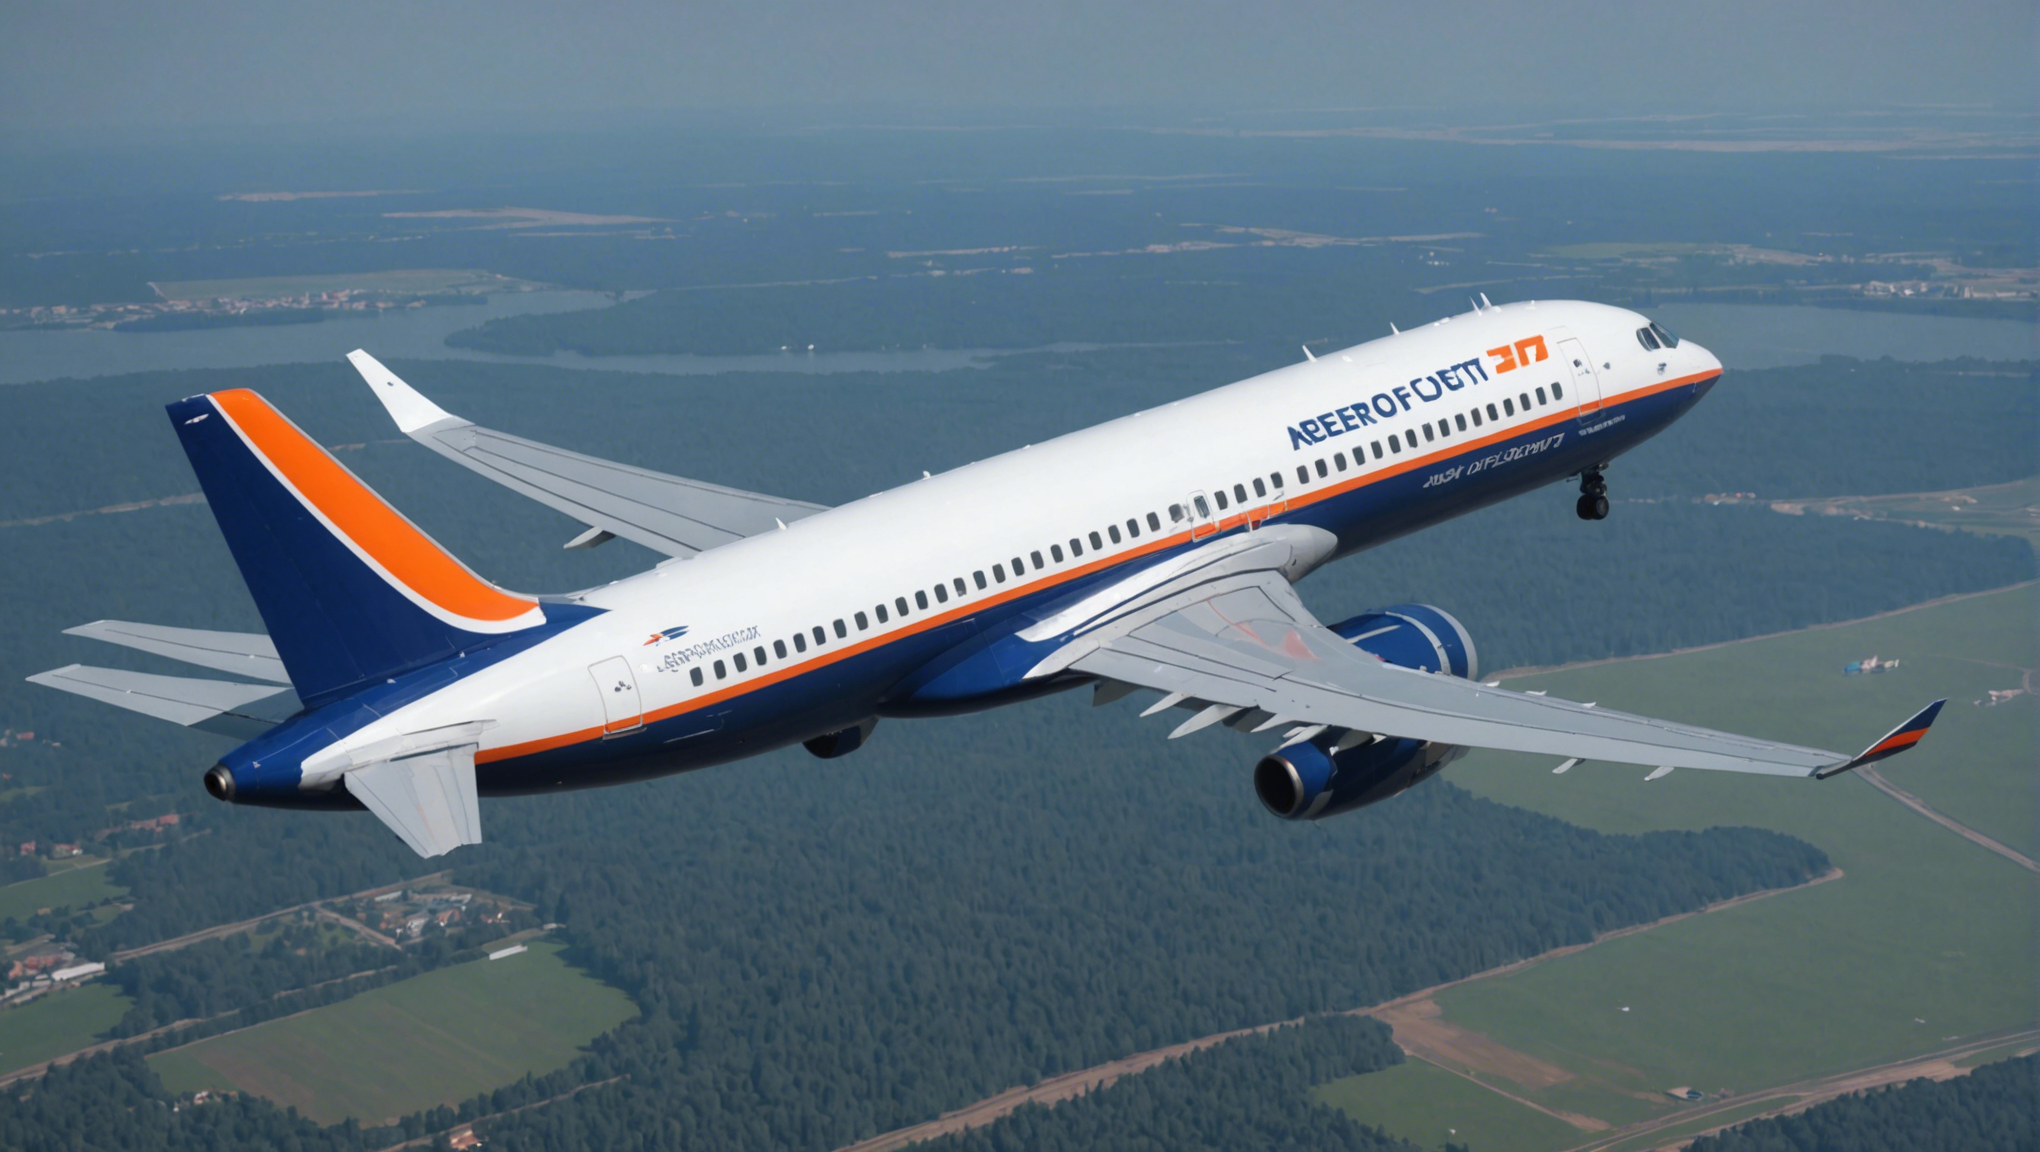 aeroflot abandons ssj100 and tu-214 aircraft in favor of the mc-21 - find out about the russian airline's latest decisions.